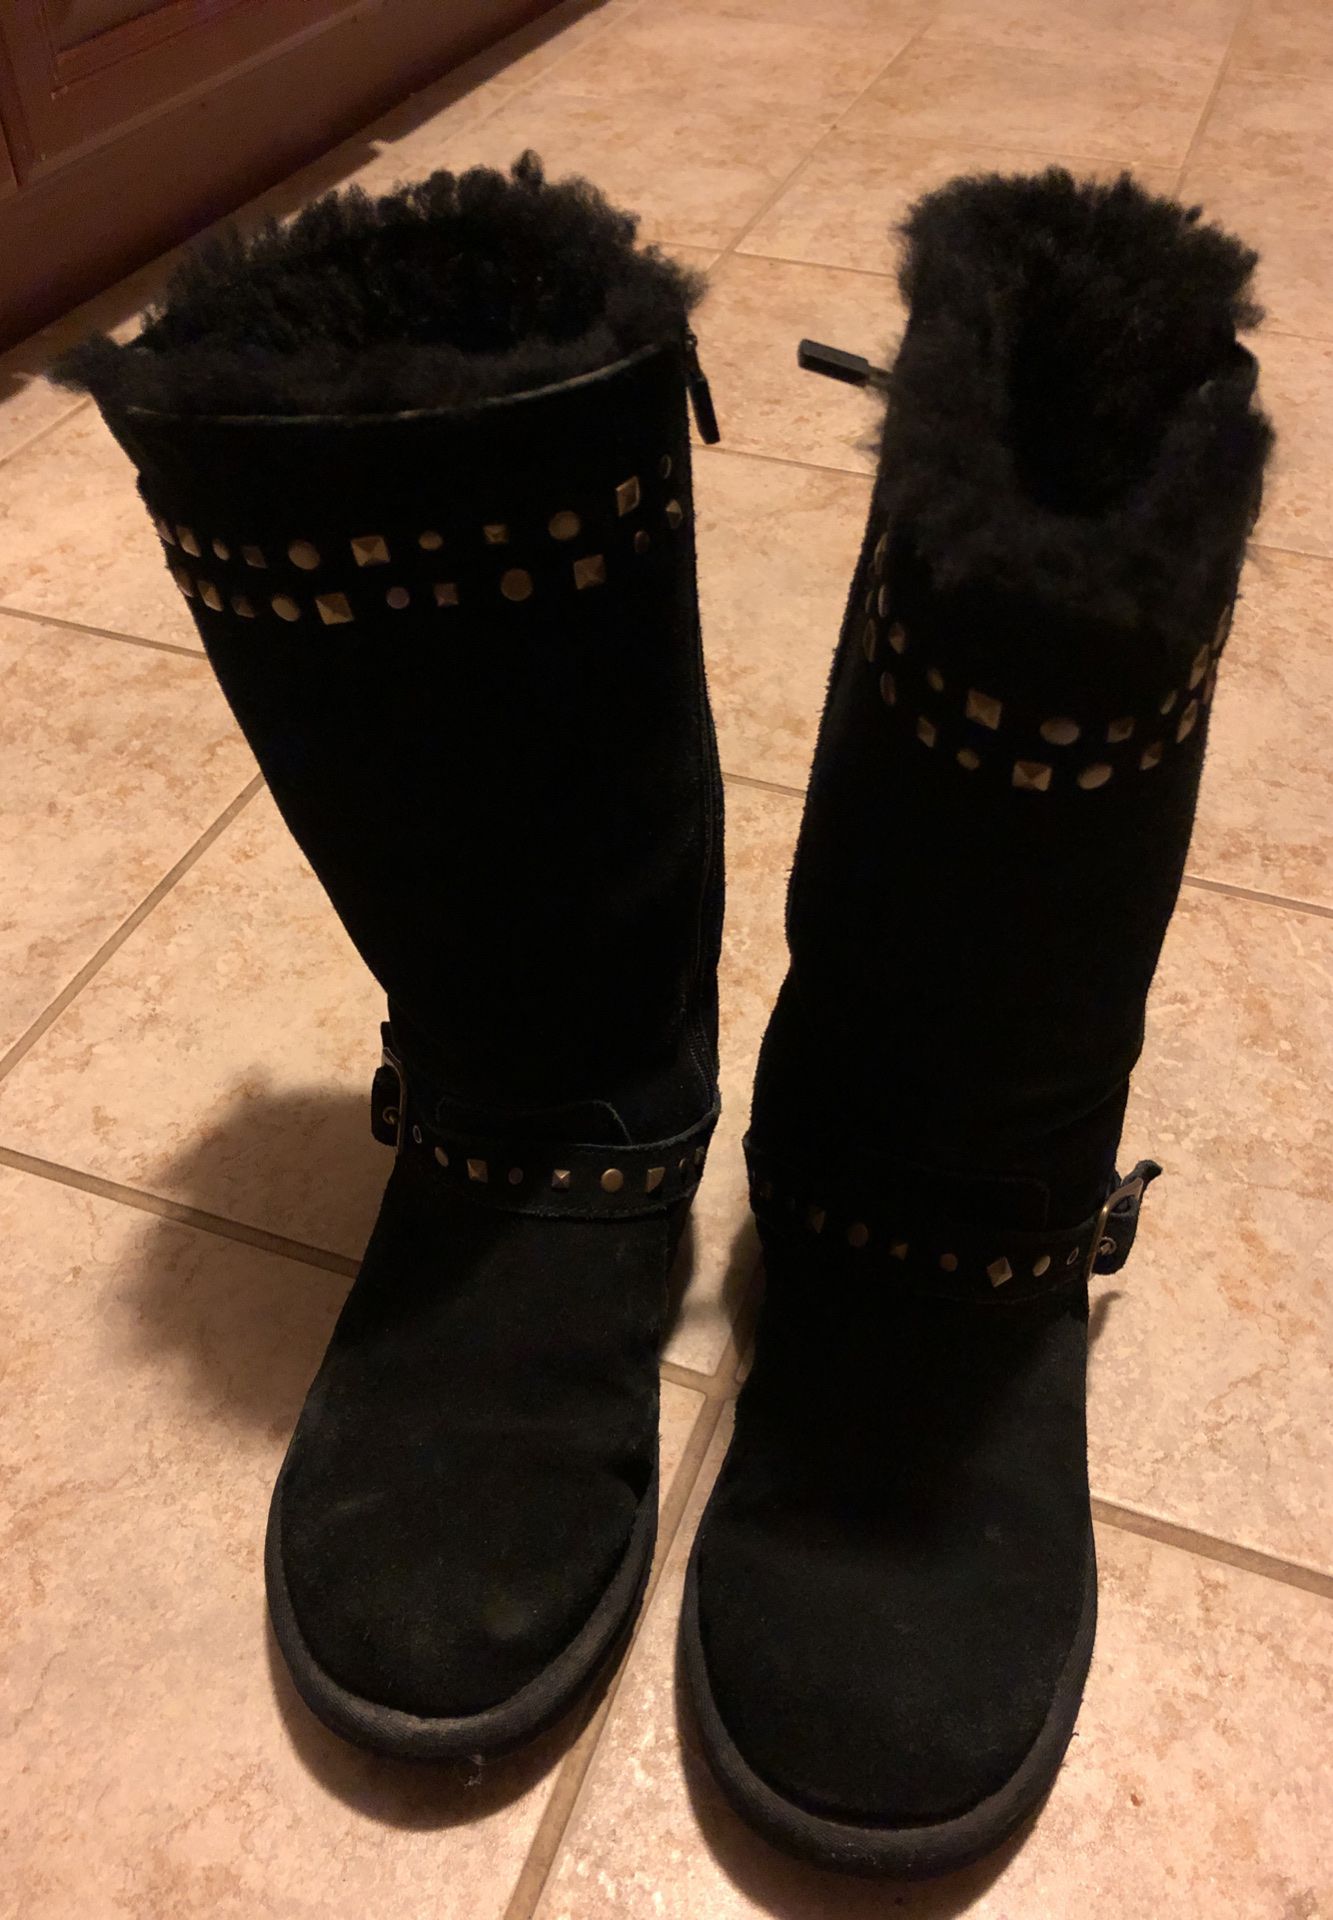 More UGG boots Barely worn. Fur lined. I’m pretty sure they are size 8